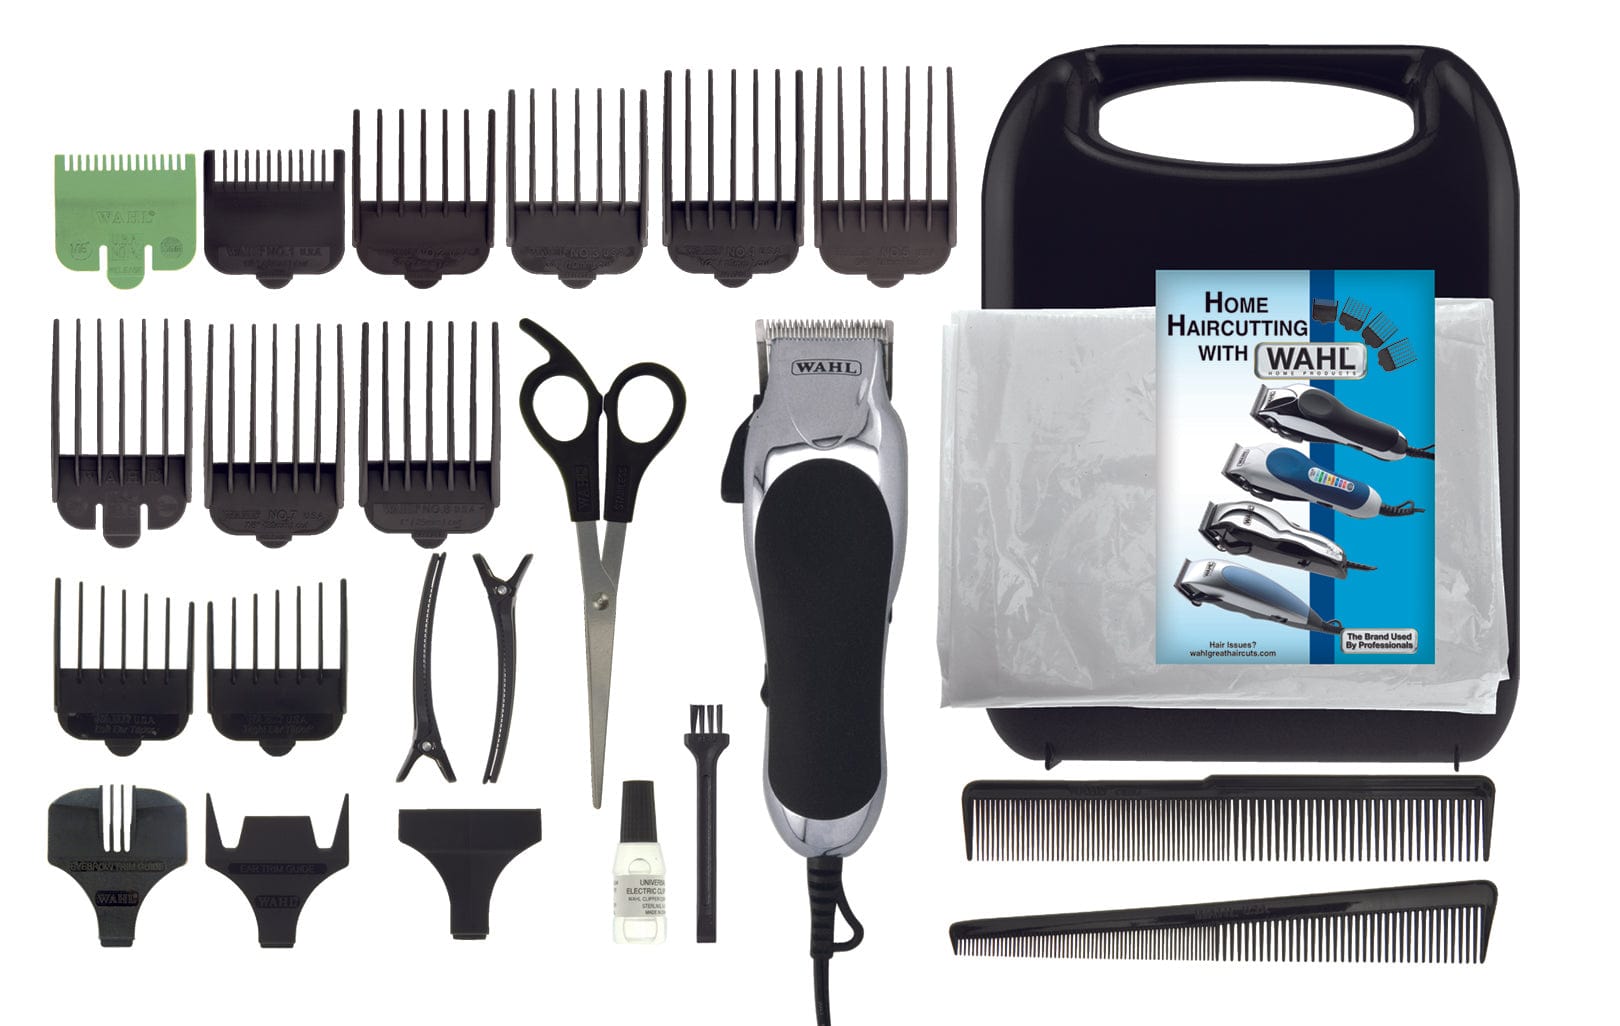 WAHL CHROMEPRO CORDED CLIPPER COMPLETE HAIR CUTTING KIT - 079524-216